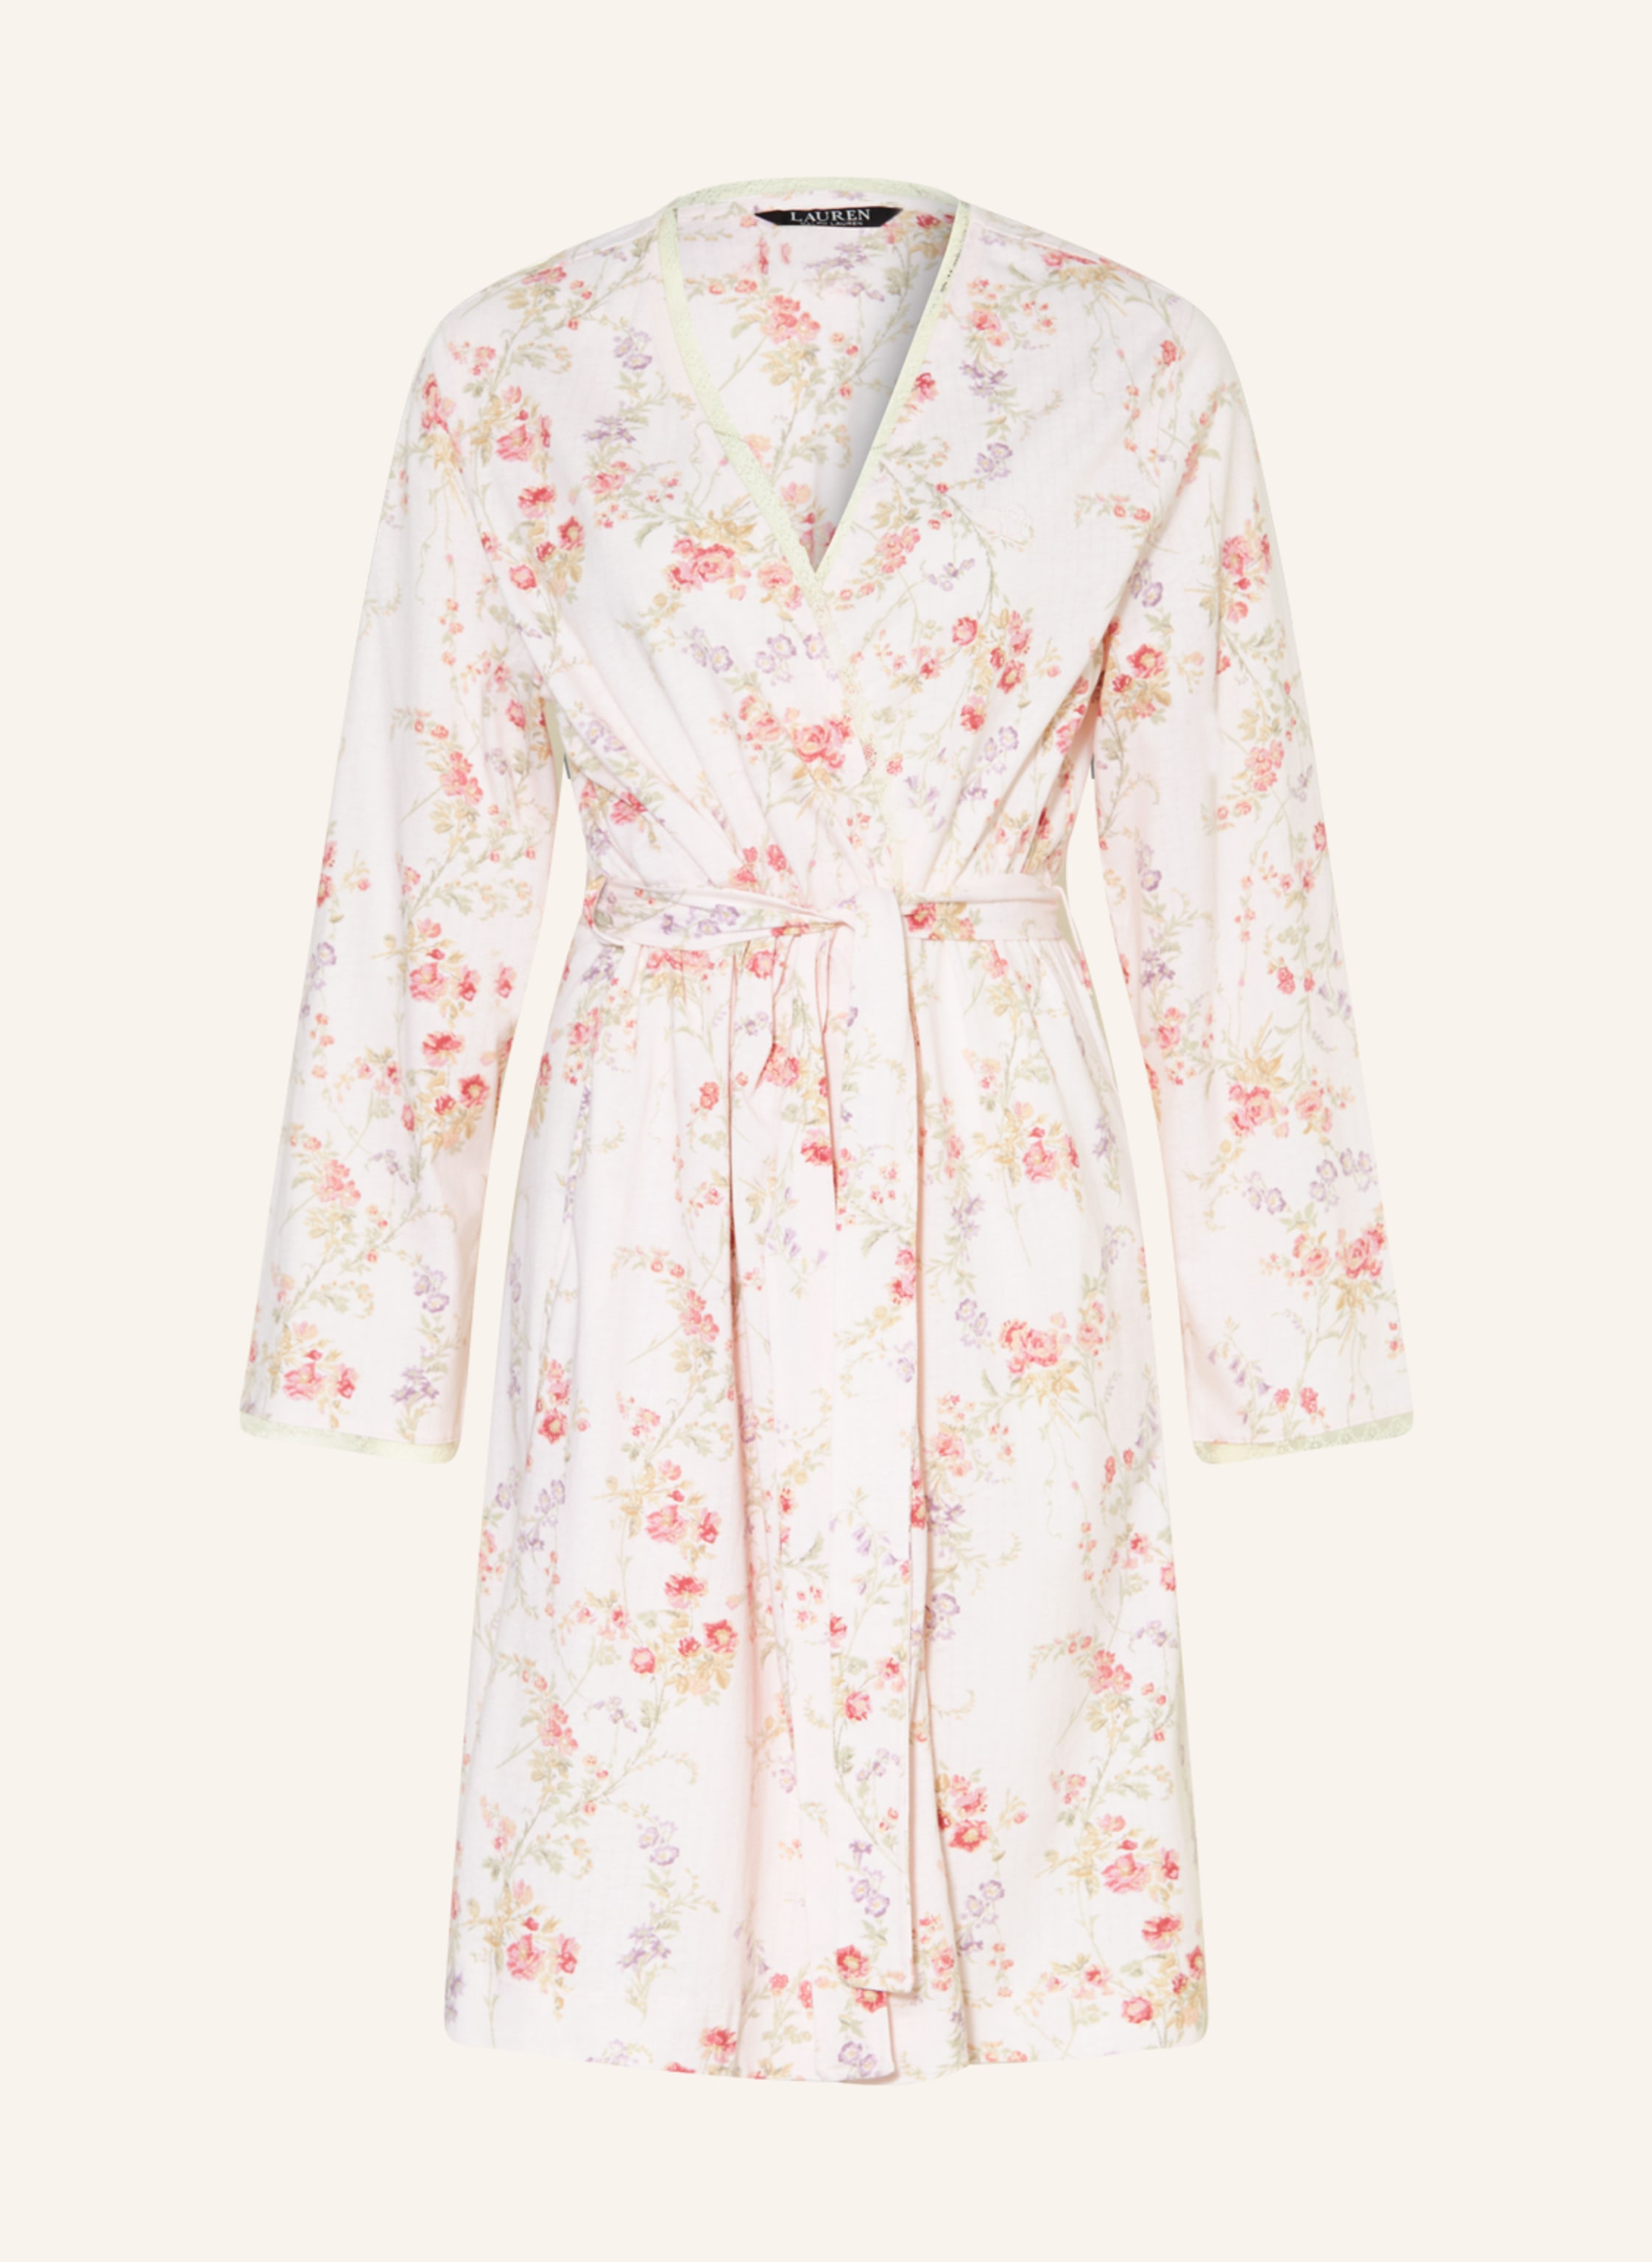 Bademantel Designer Towelling Bathrobes Asda For Couples Luxury Classic  Cotton Kimono Robe For Warmth And Style Unisex Home Wear Klw1739 From  Clothes_1, $165.69 | DHgate.Com